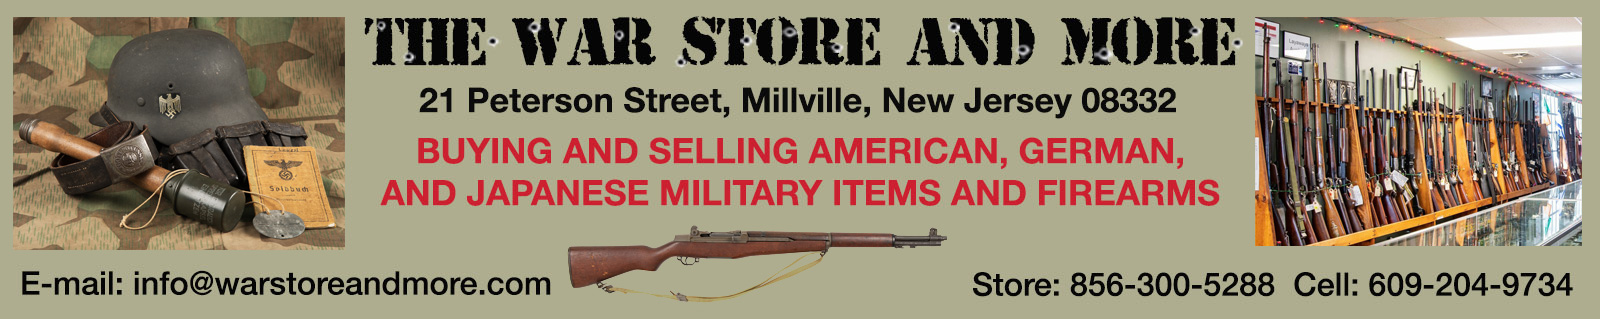 The War Store and More – Military Antiques & Firearms, LLC